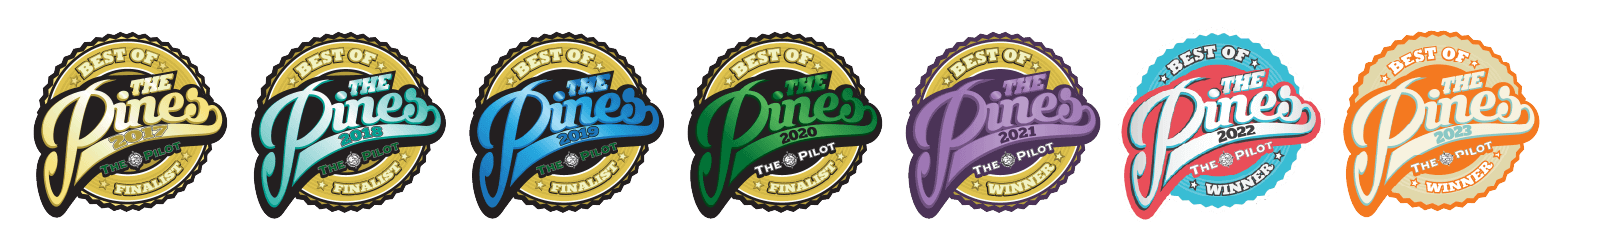 Best of The Pines Awards